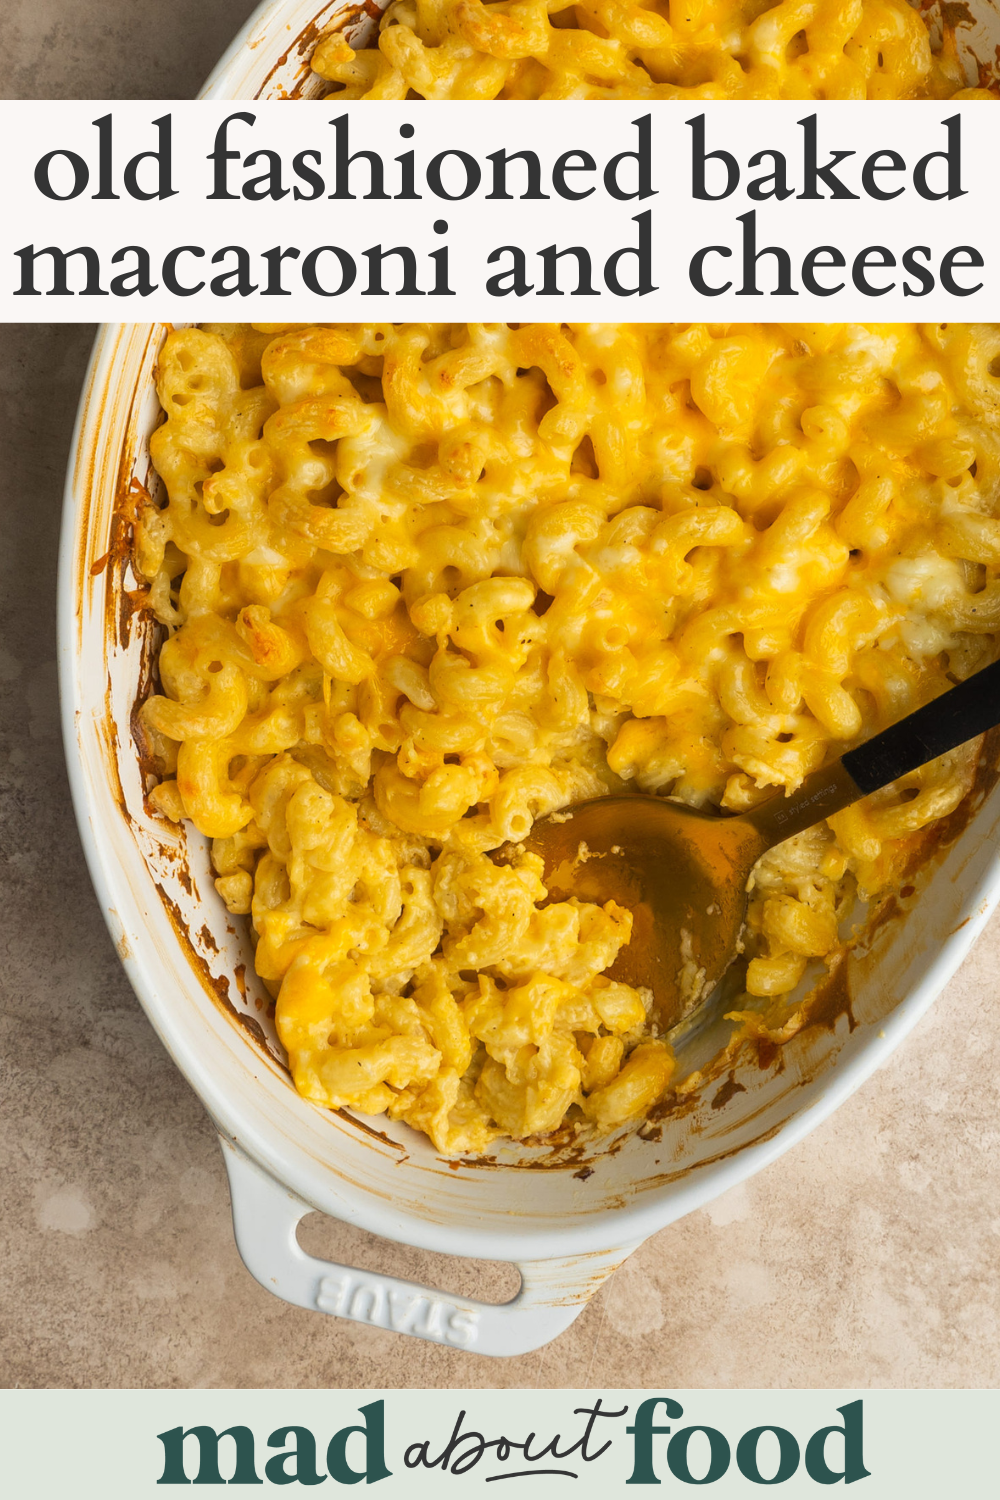 Image for pinning baked macaroni and cheese recipe on pineterest